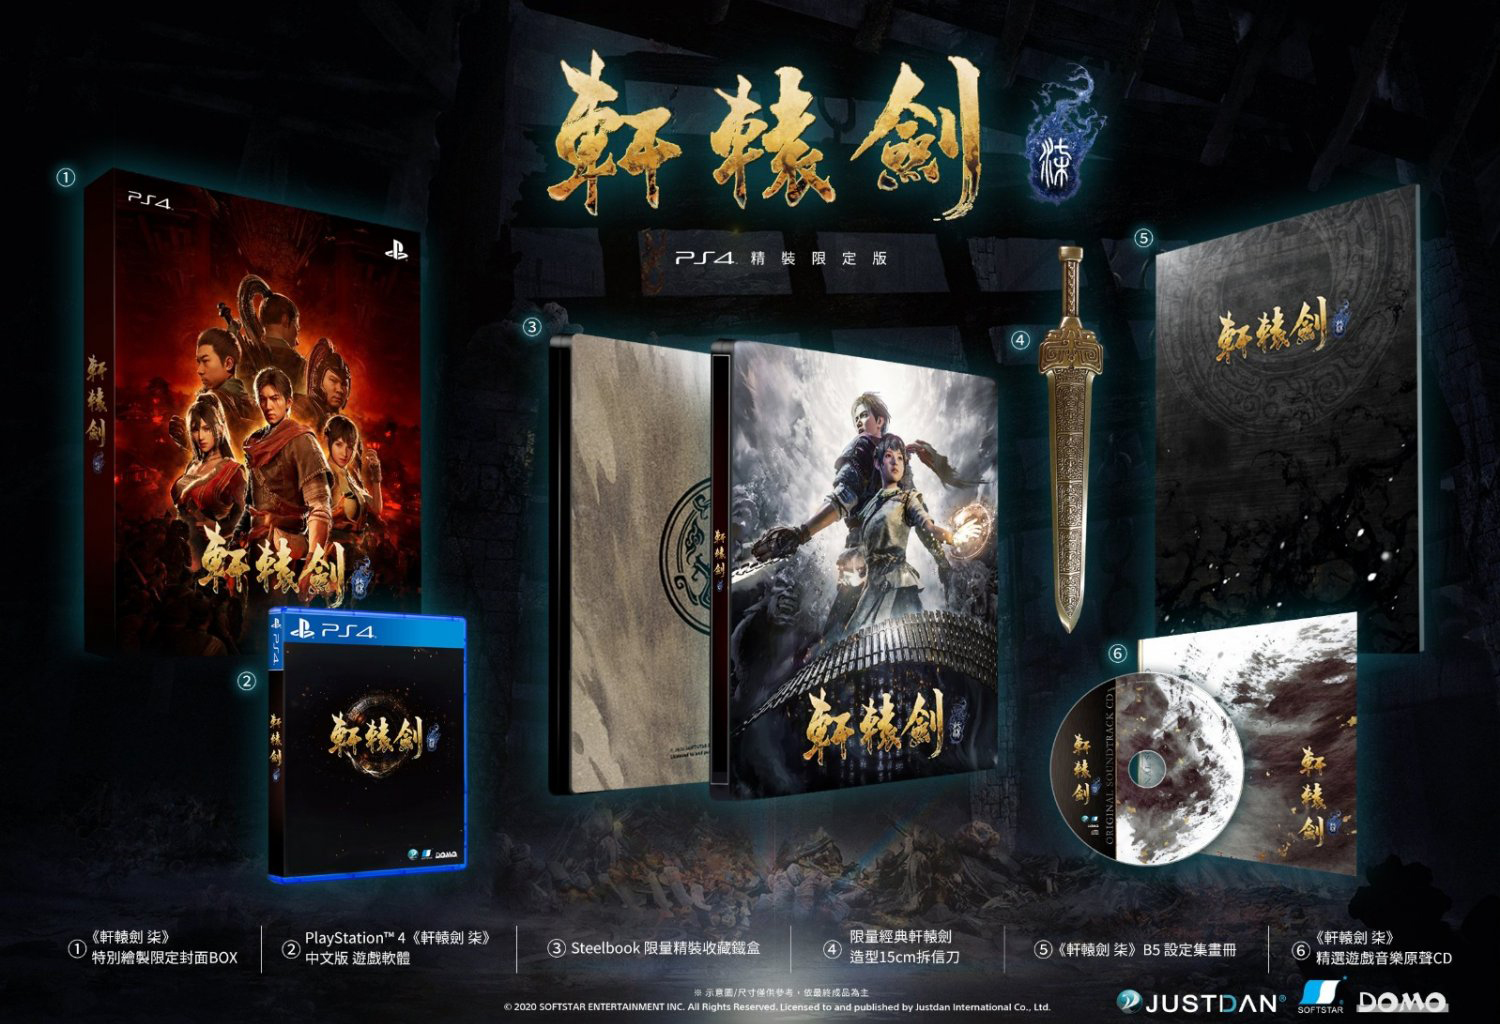 Taiwanese Action Rpg Xuan Yuan Sword 7 Transports Players Back To Sword Fighting Ancient China Geek Culture